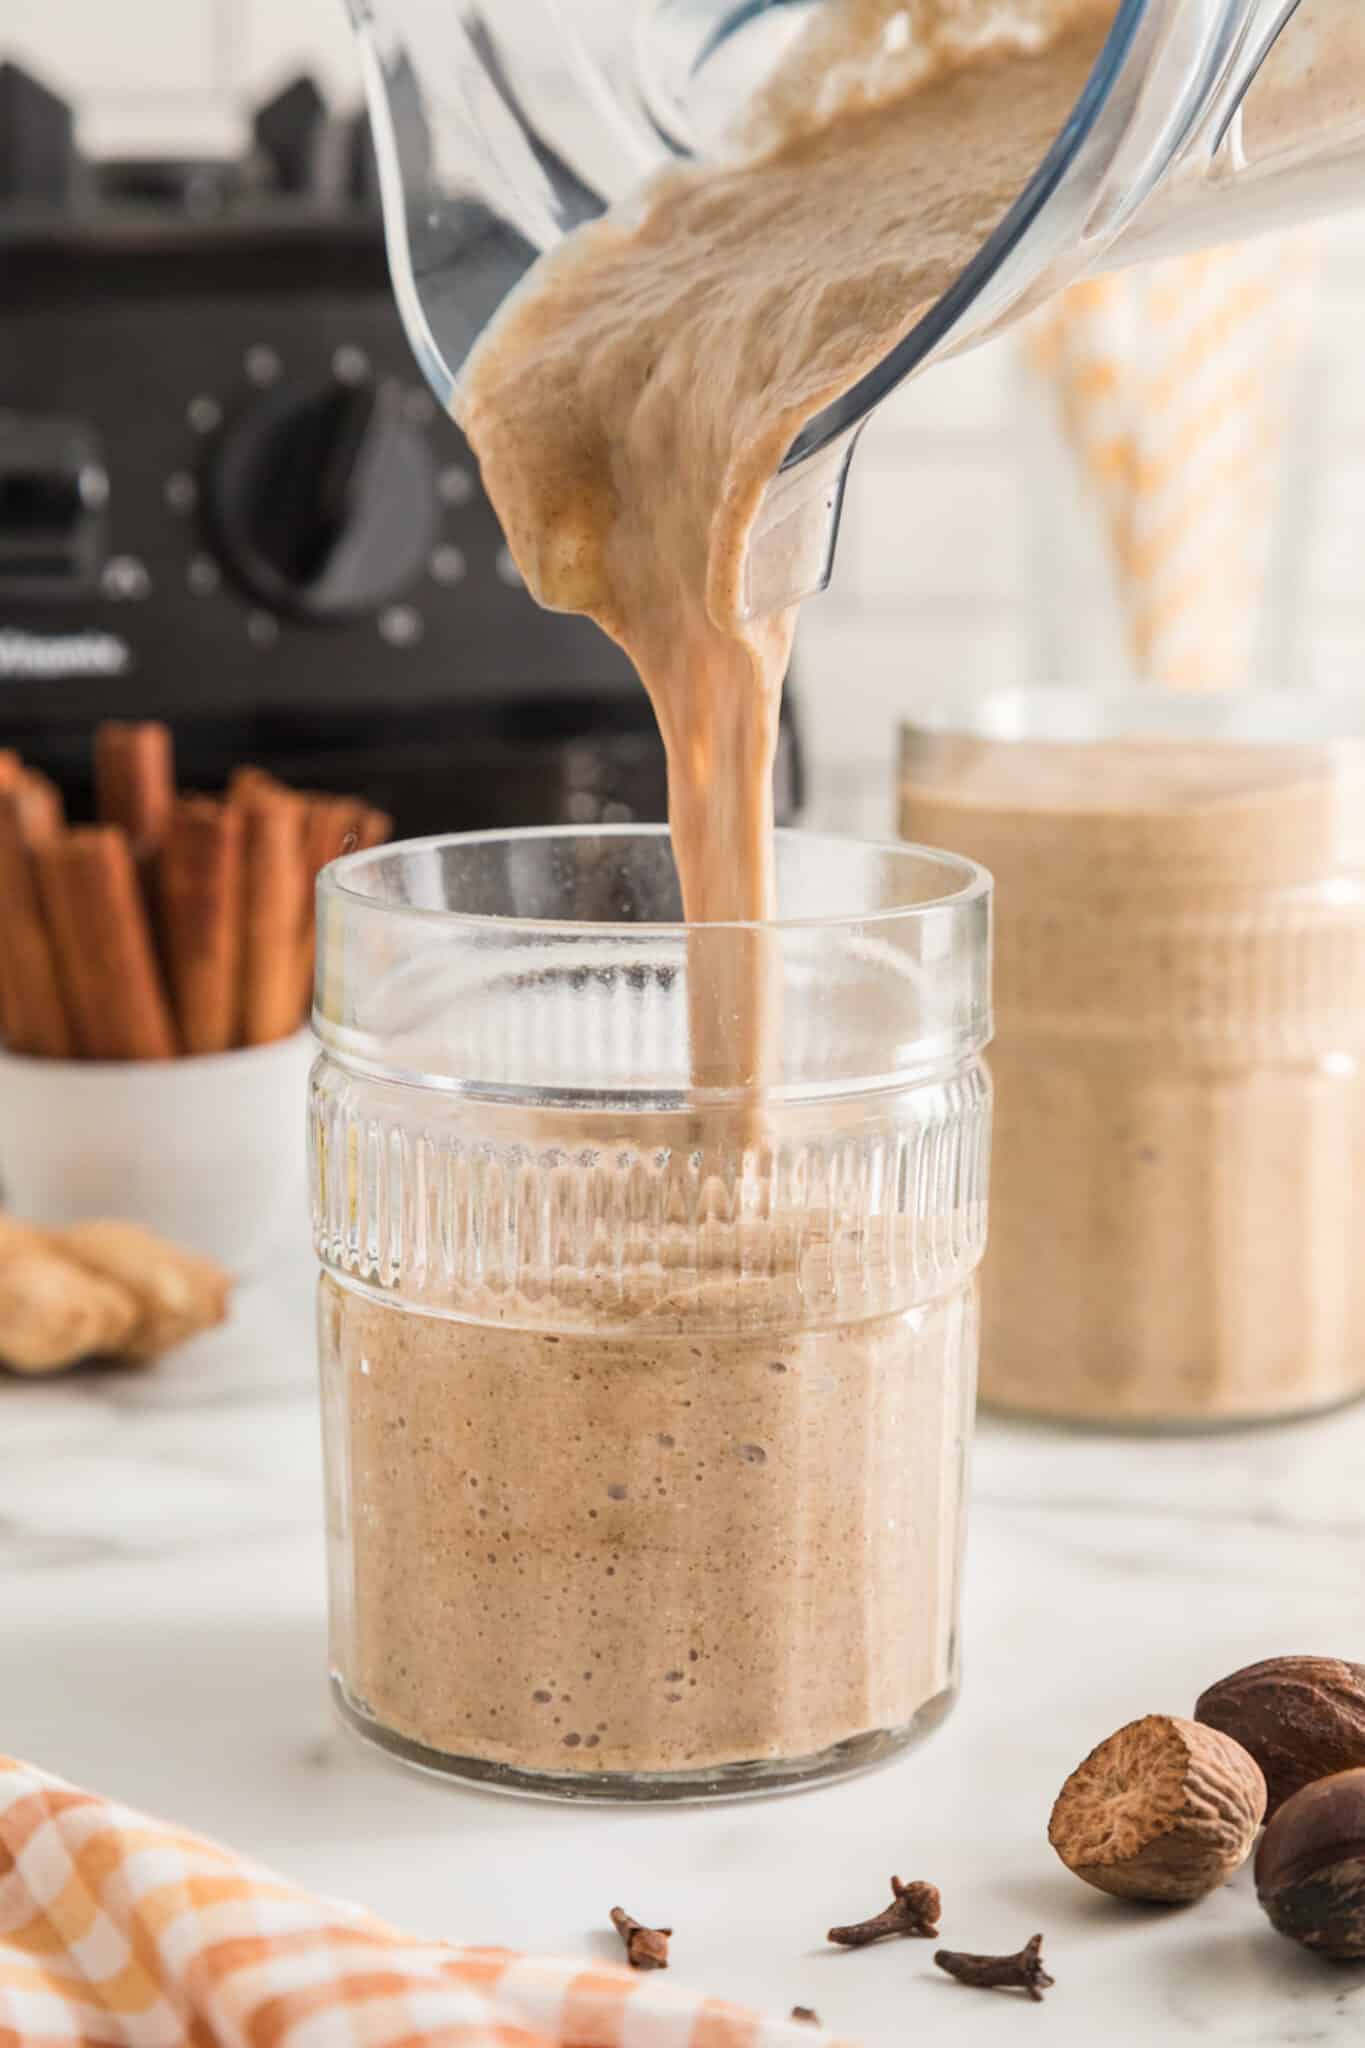 A blender jar pouring gingerbread smoothie into a glass.